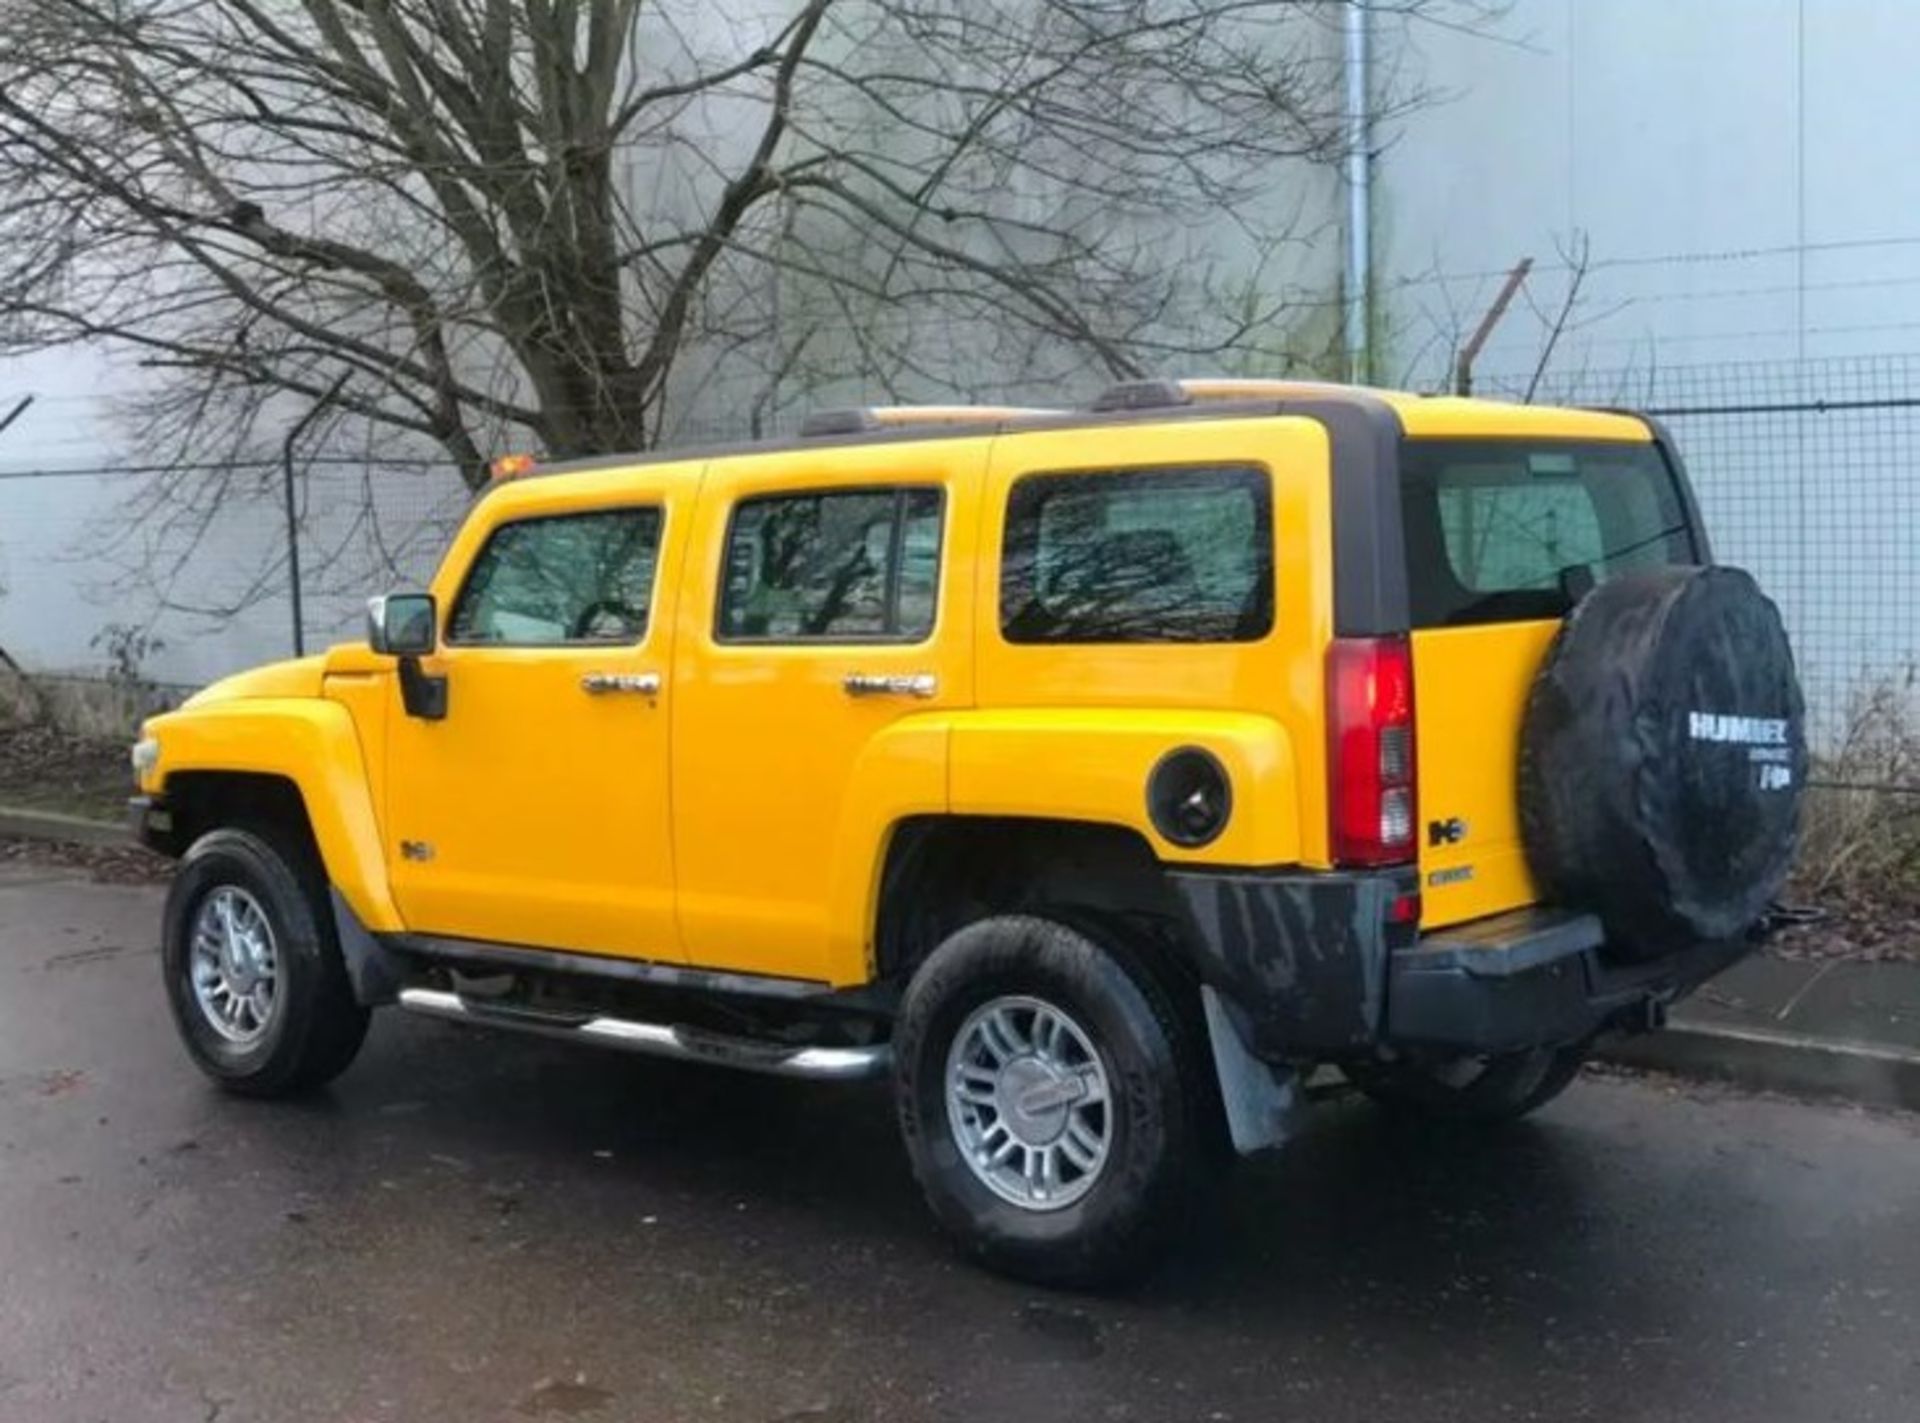 2007 HUMMER H3 3.5 LEFT HAND DRIVE YELLOW MODIFIED LHD *NO VAT* - Image 4 of 6